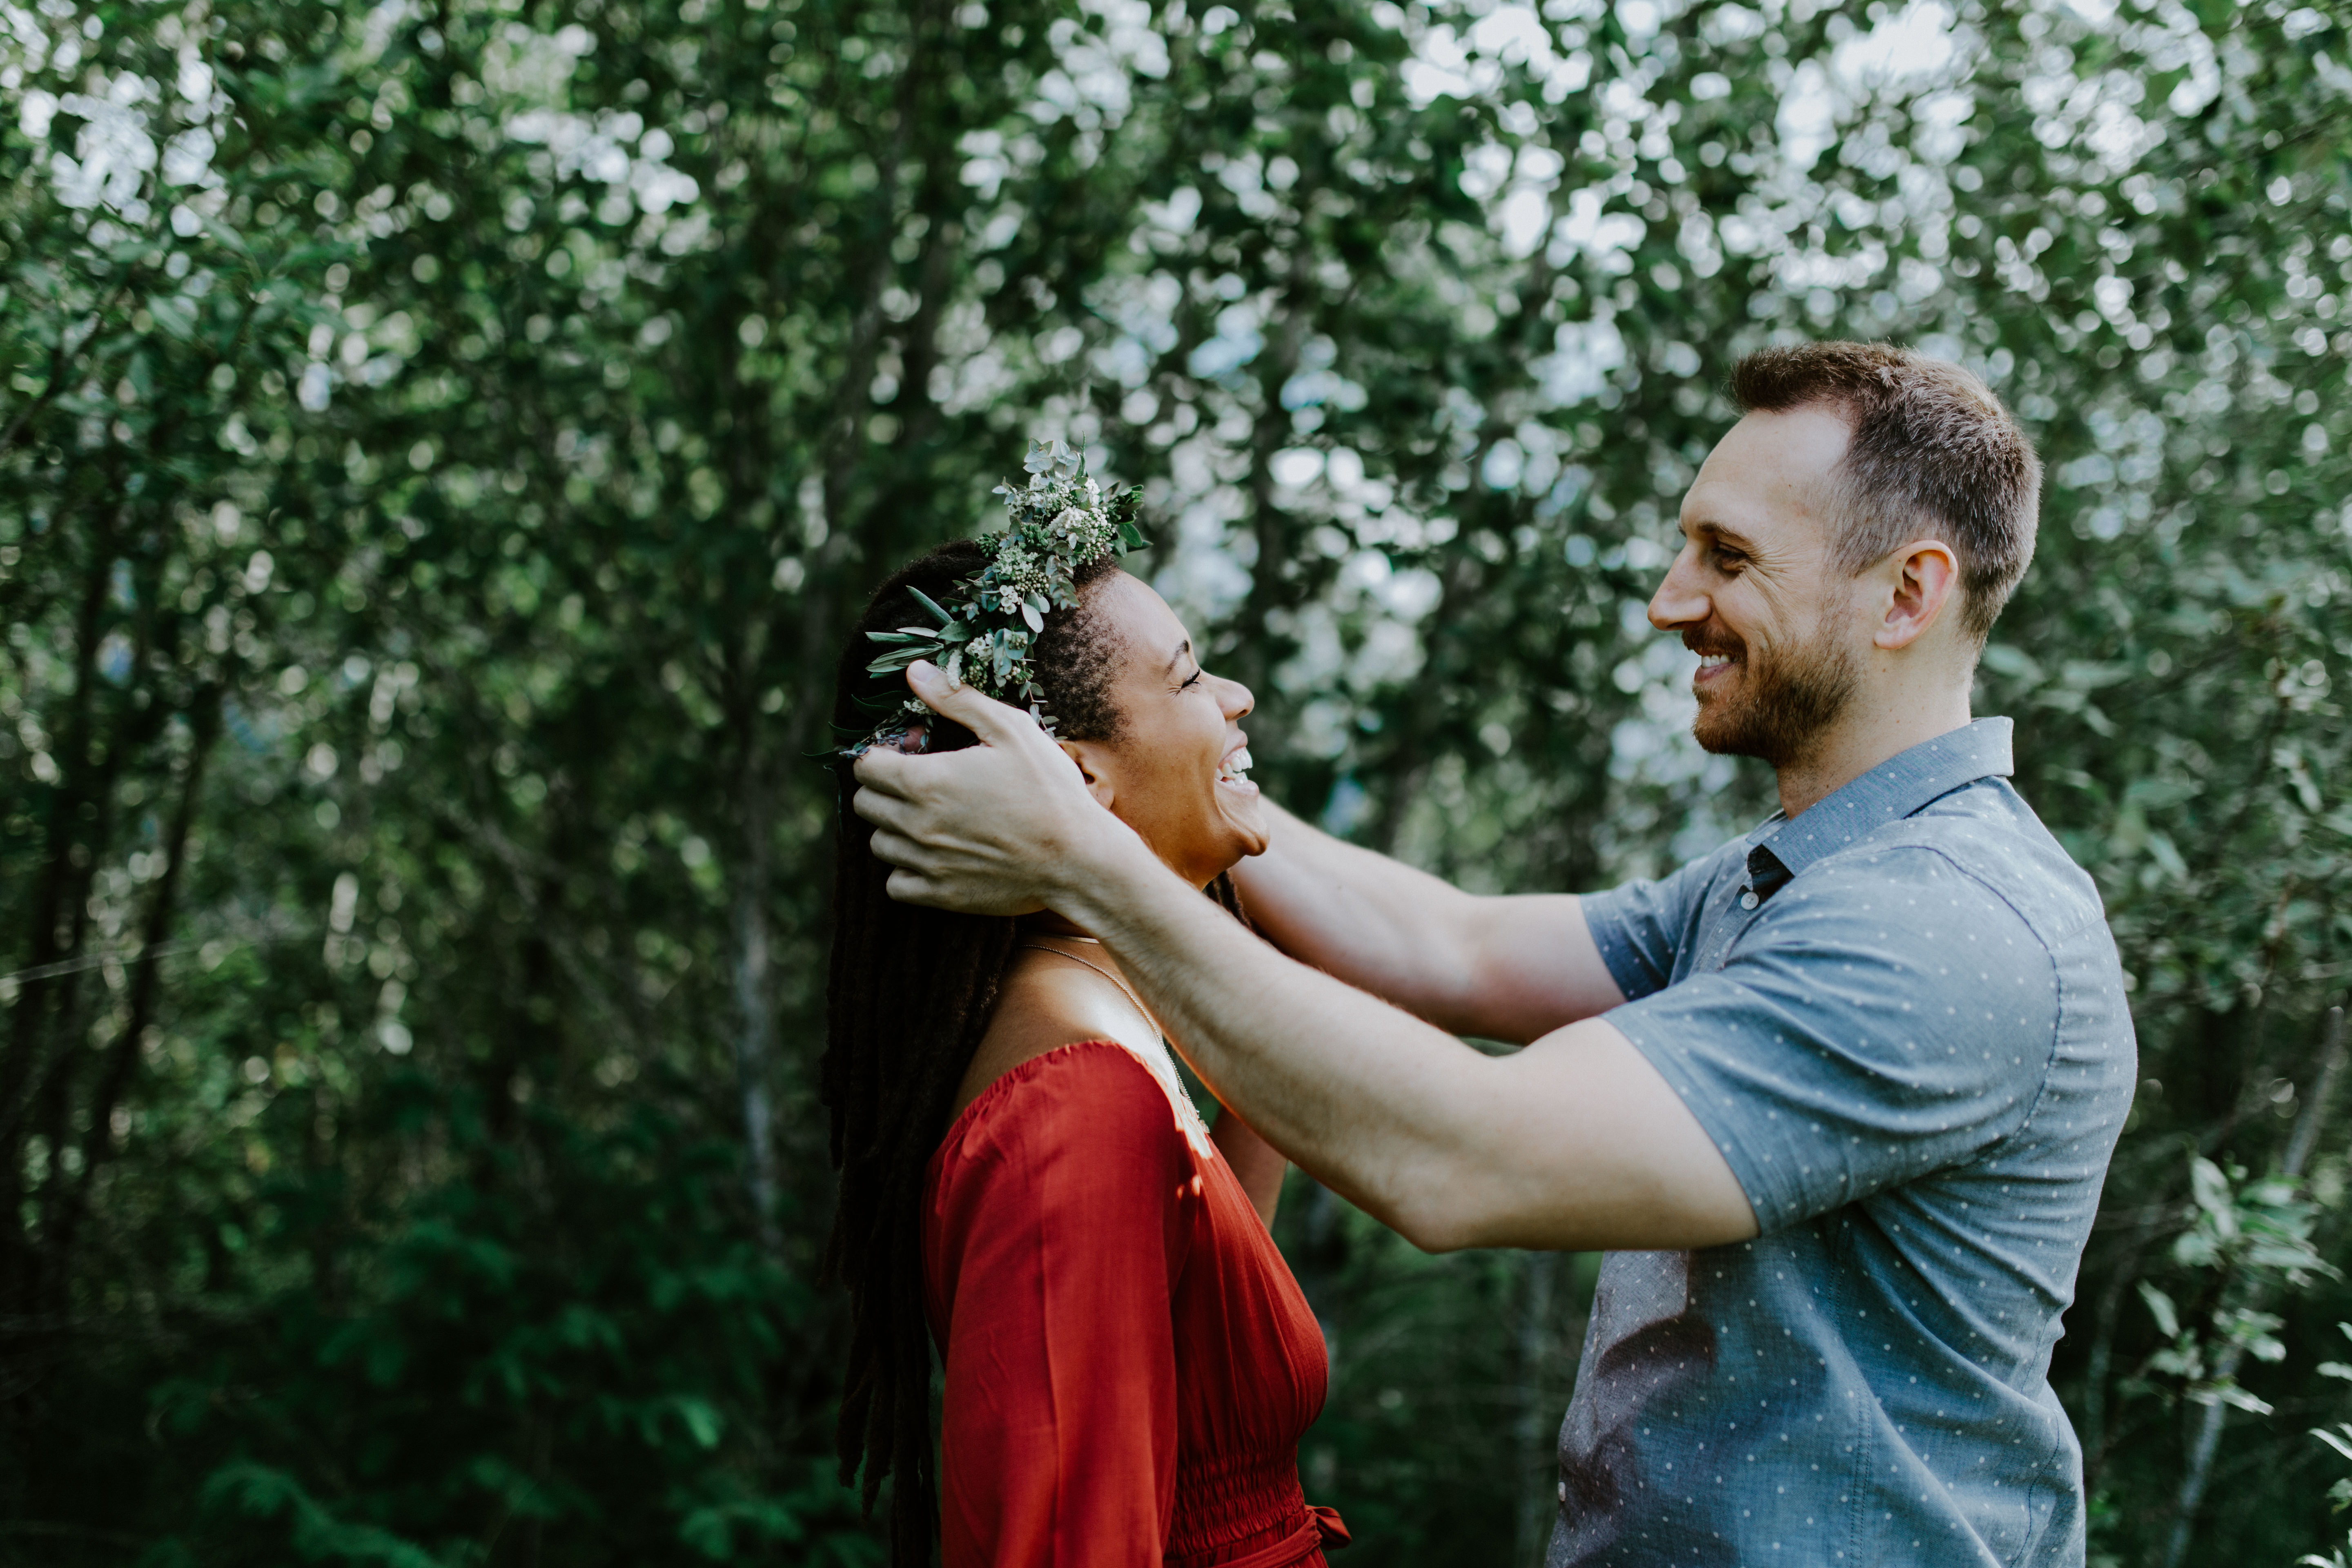 Garrett places a flower crown on Kayloni at Cascade Locks in Oregon during their elopement. Engagement photography in Portland Oregon by Sienna Plus Josh.